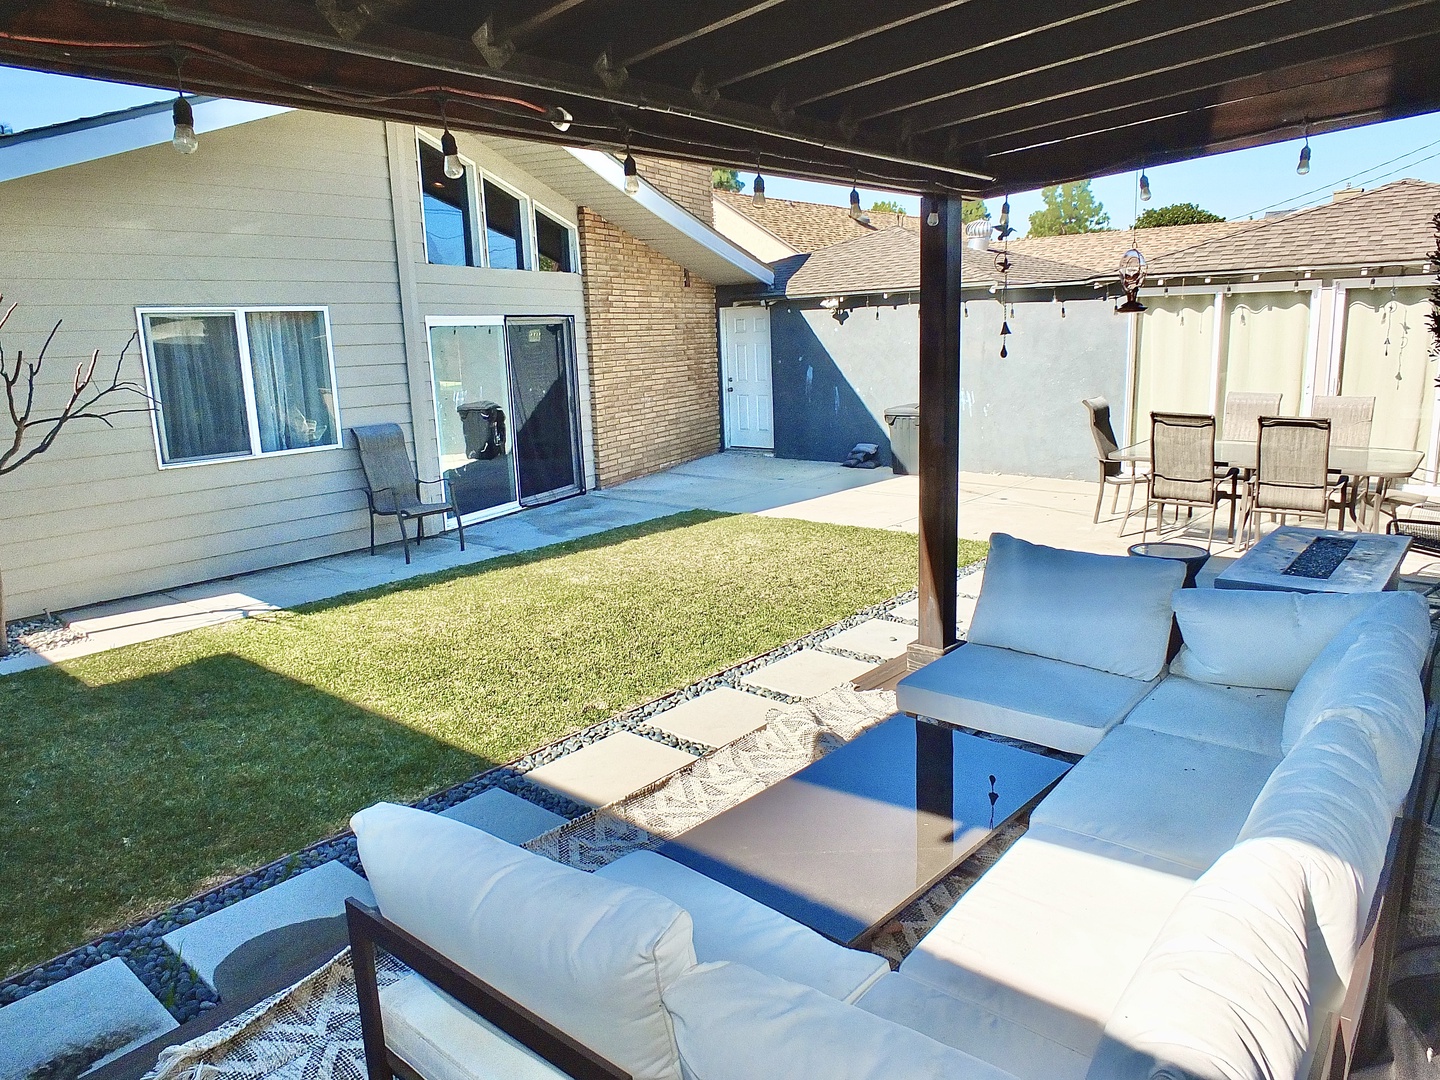 Savor family meals and play games in the spacious yard